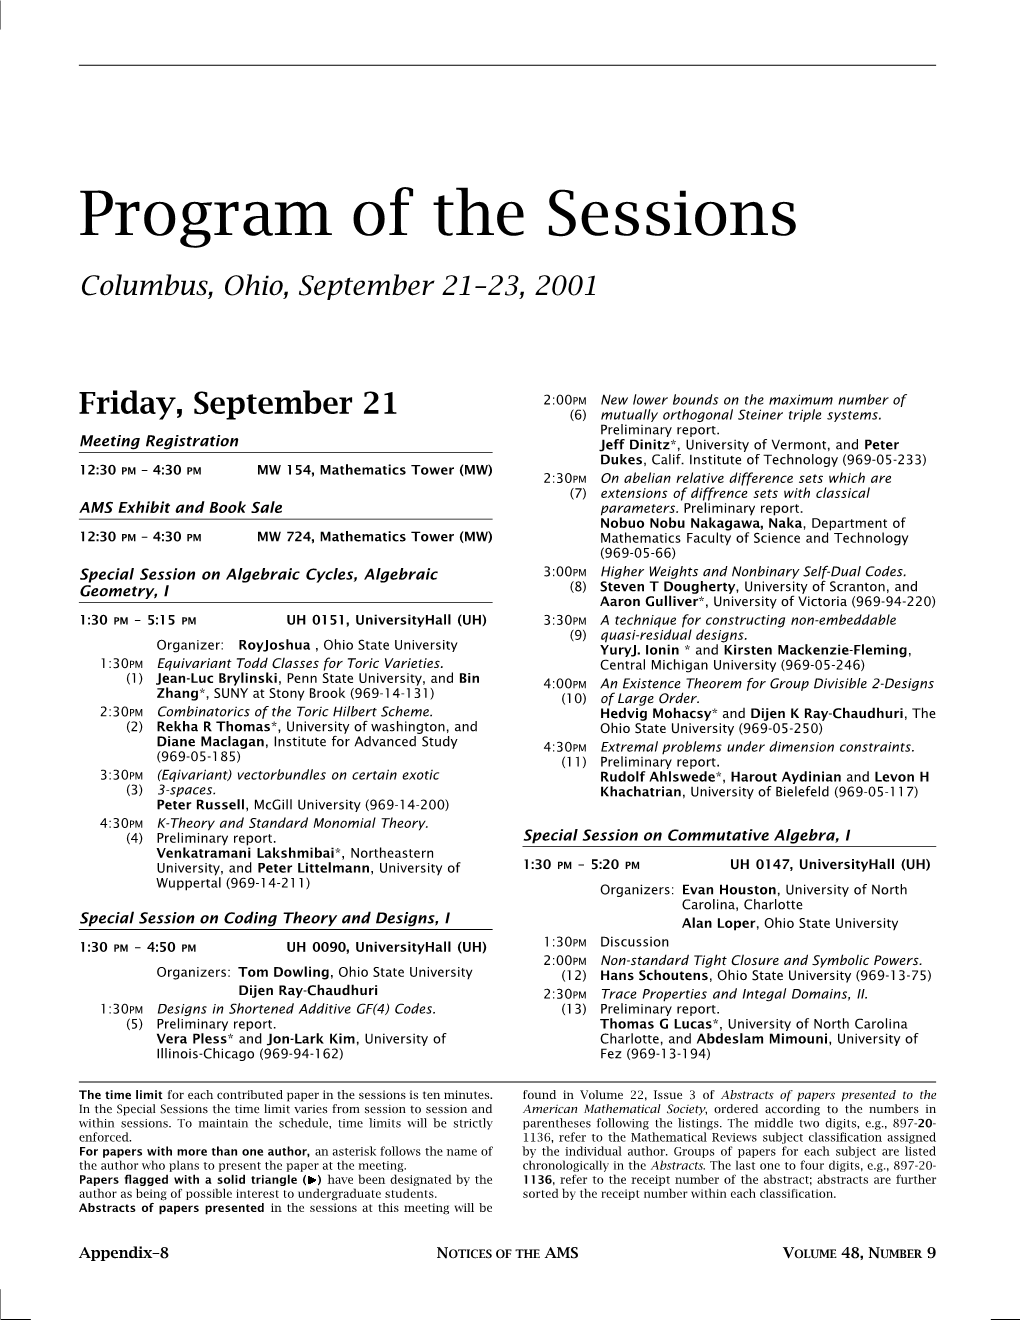 Program of the Sessions – Columbus, OH, Friday, September 21 (Cont’D.)